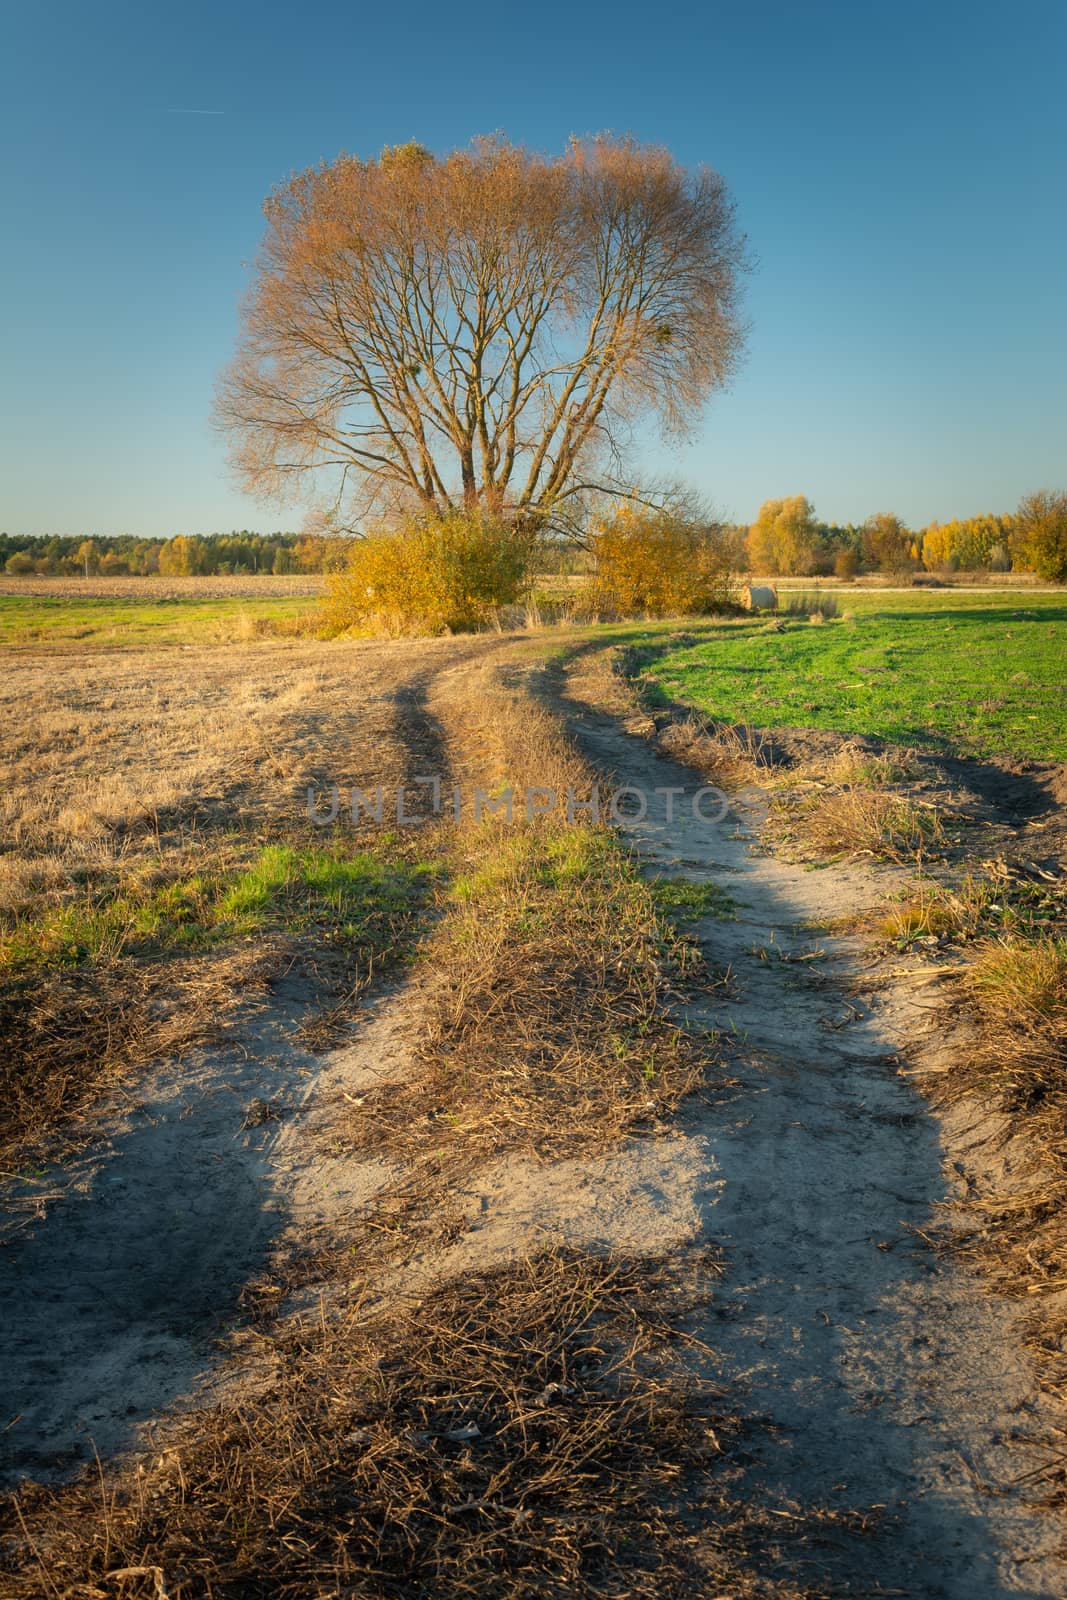 Dirt road towards a tall tree with no leaves, autumnal rural view